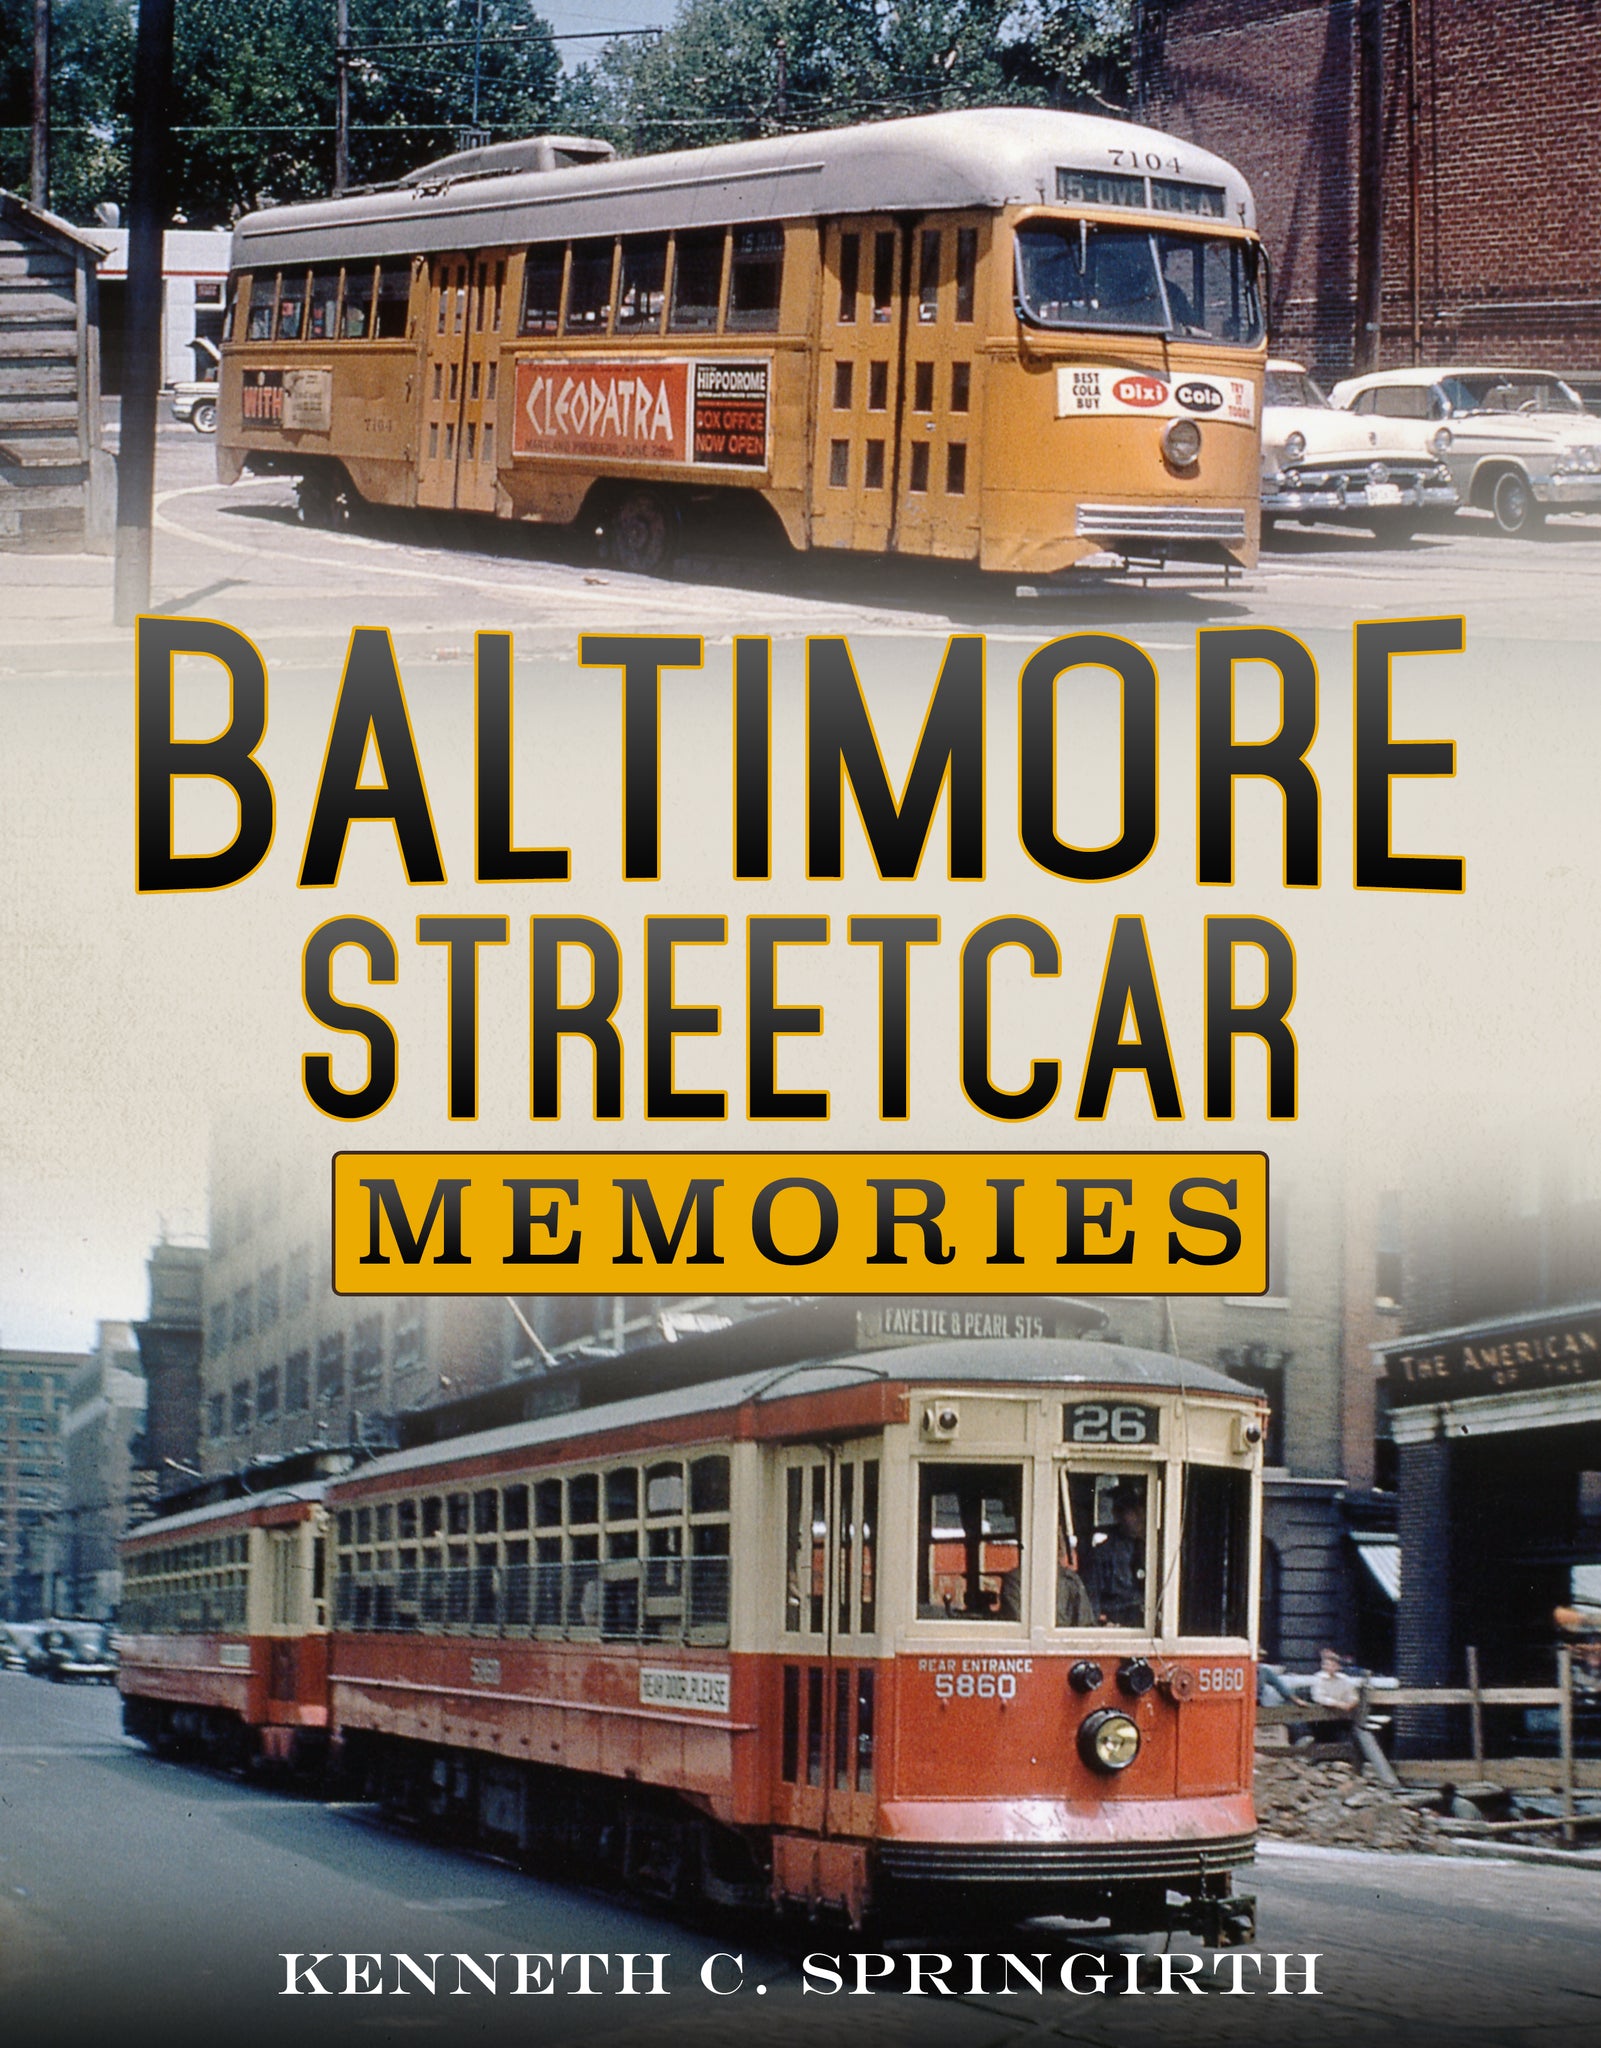 Baltimore Streetcar Memories - available from America Through Time